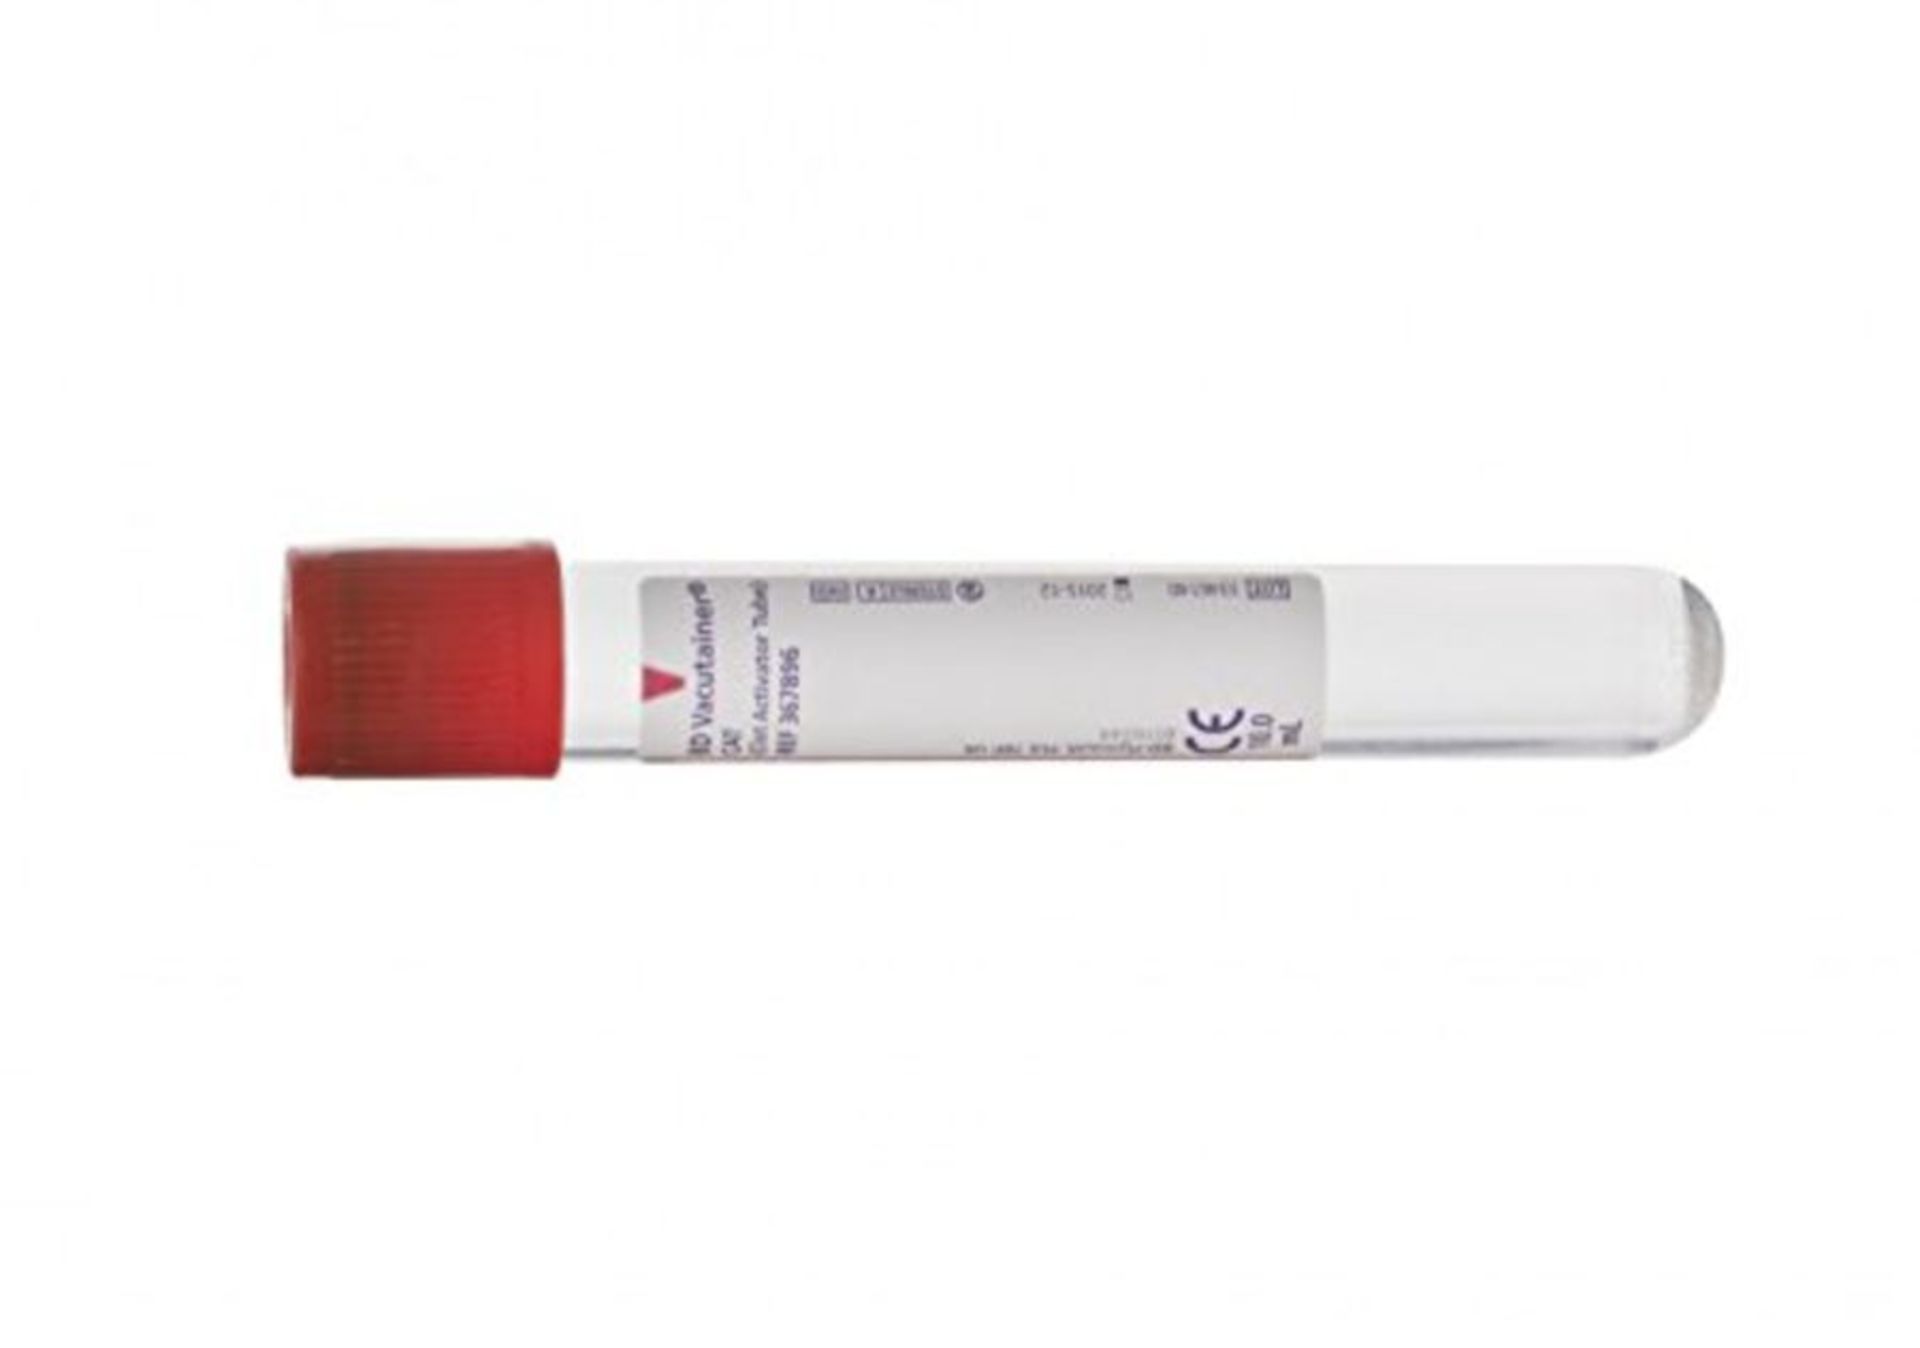 BD VS367896 Vacutainer Tube for Serum Analysis, 10 ml,Pack of 100, Red